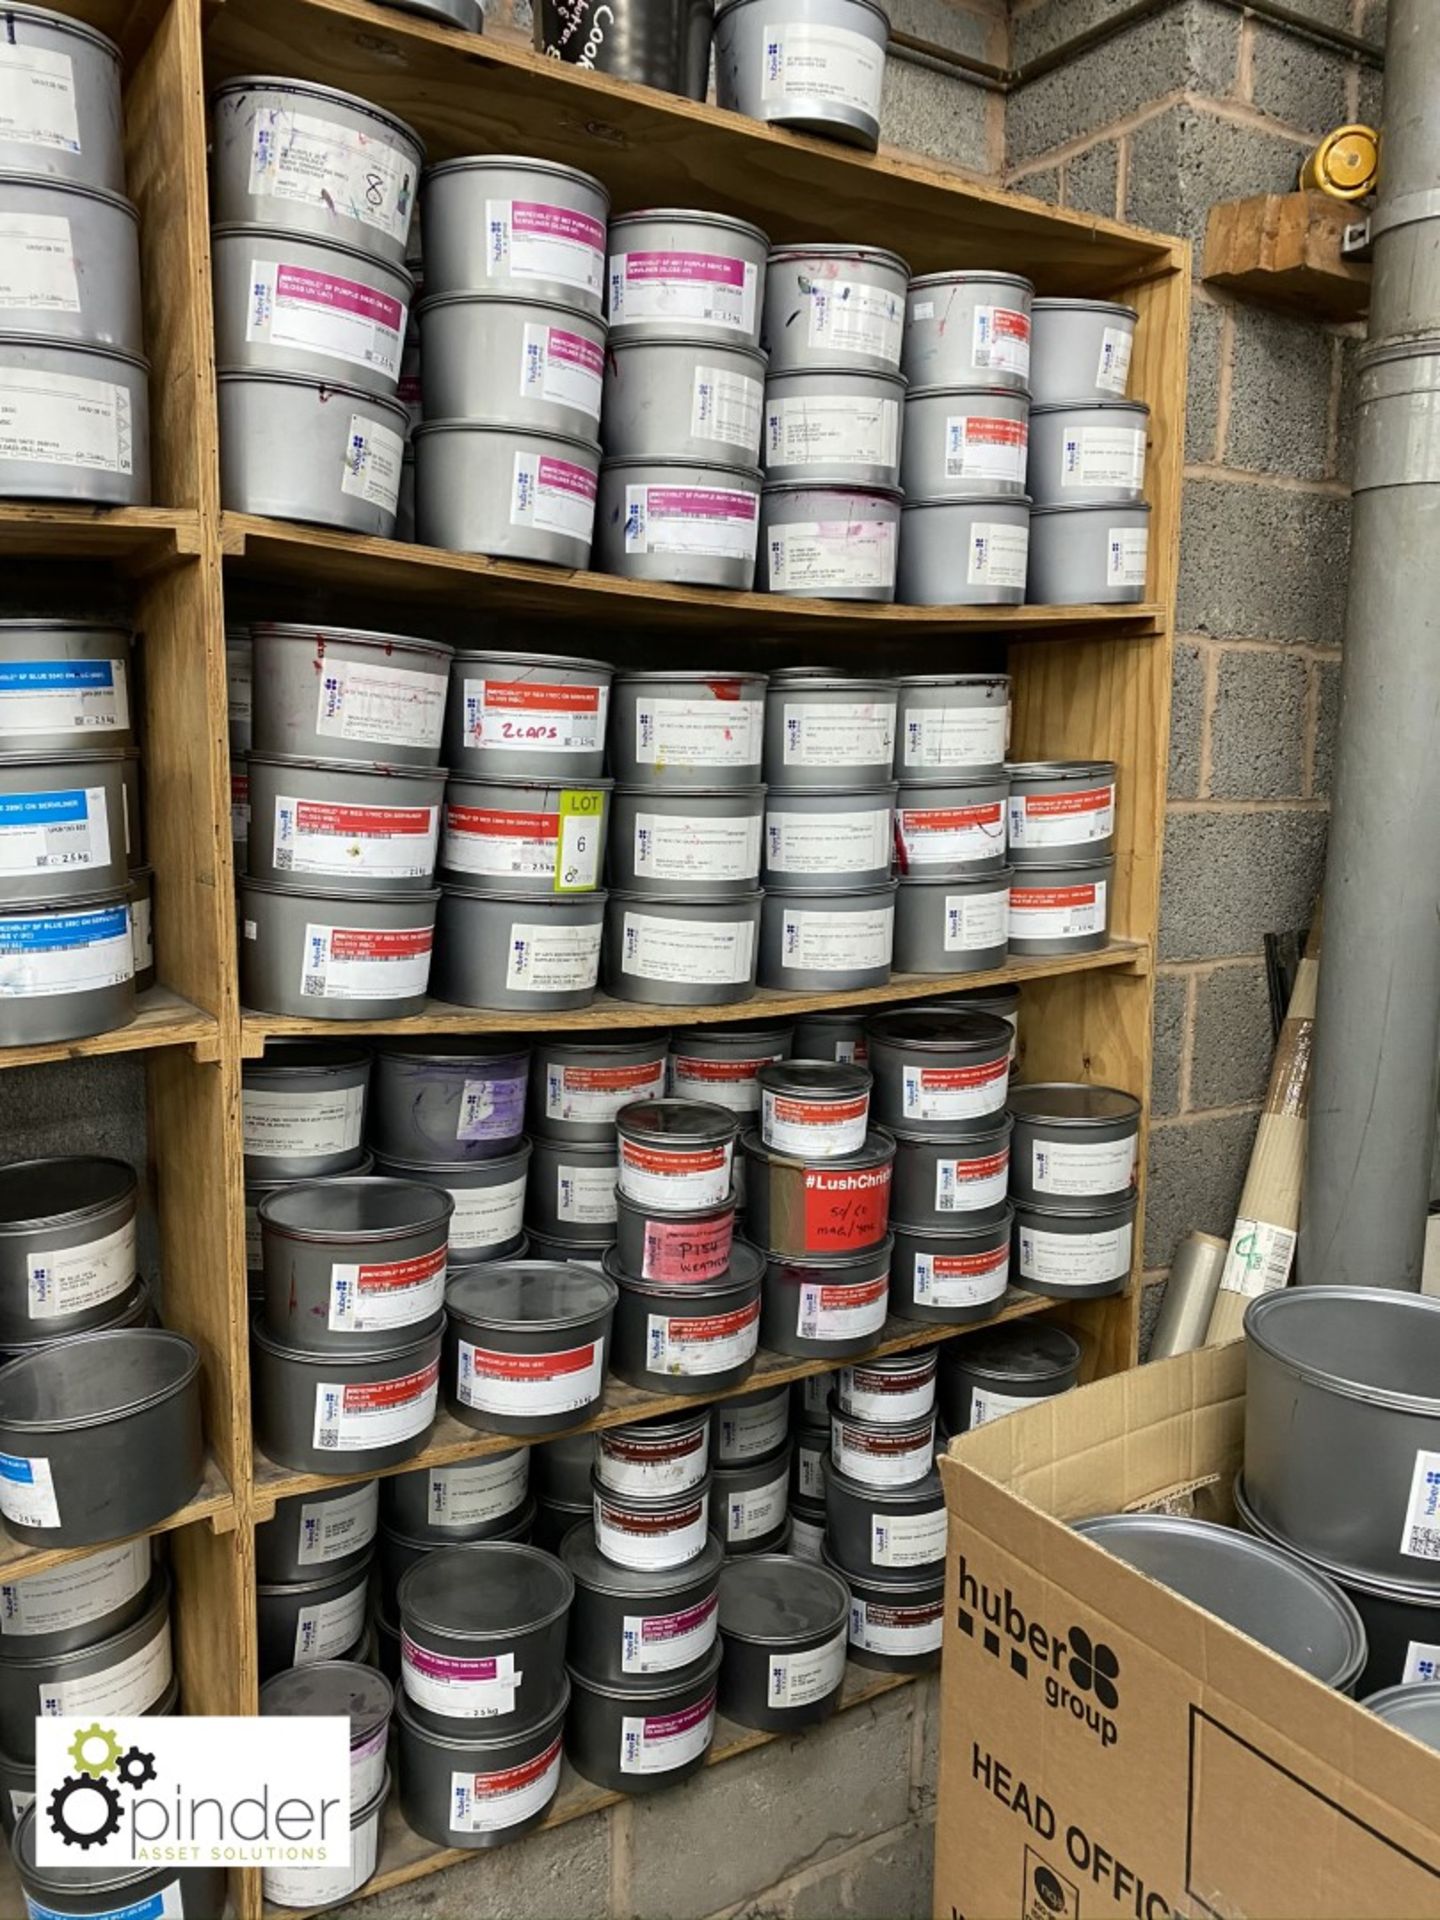 Quantity Huber Printing Inks, red tones, full and part tins